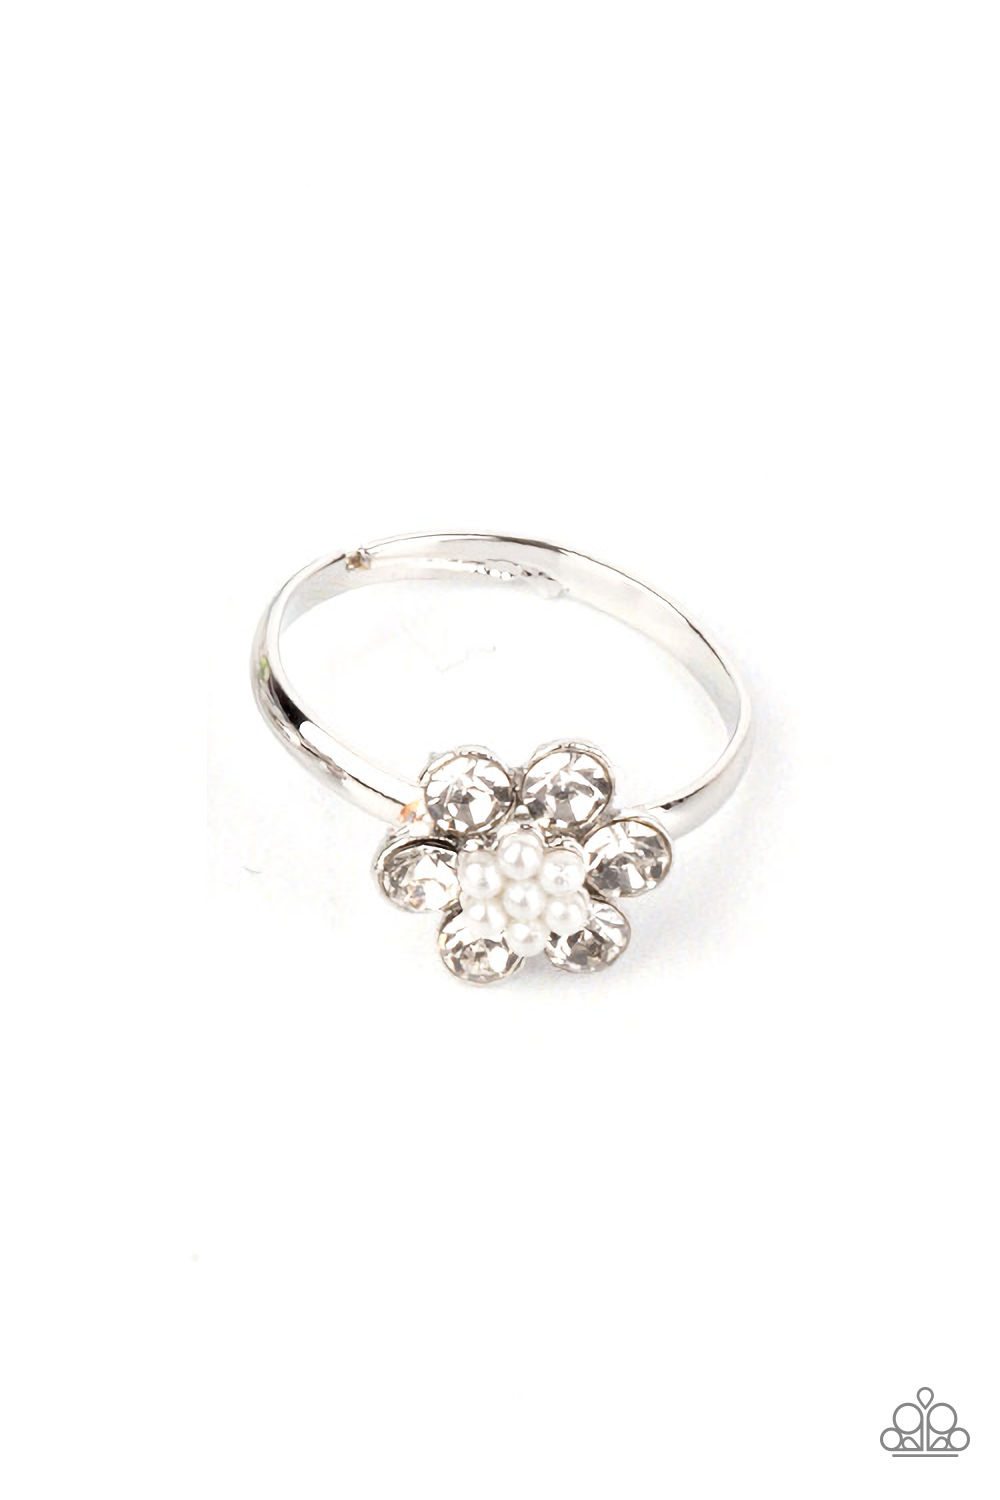 Ring - Starlet Shimmer Flower with Pearls - White